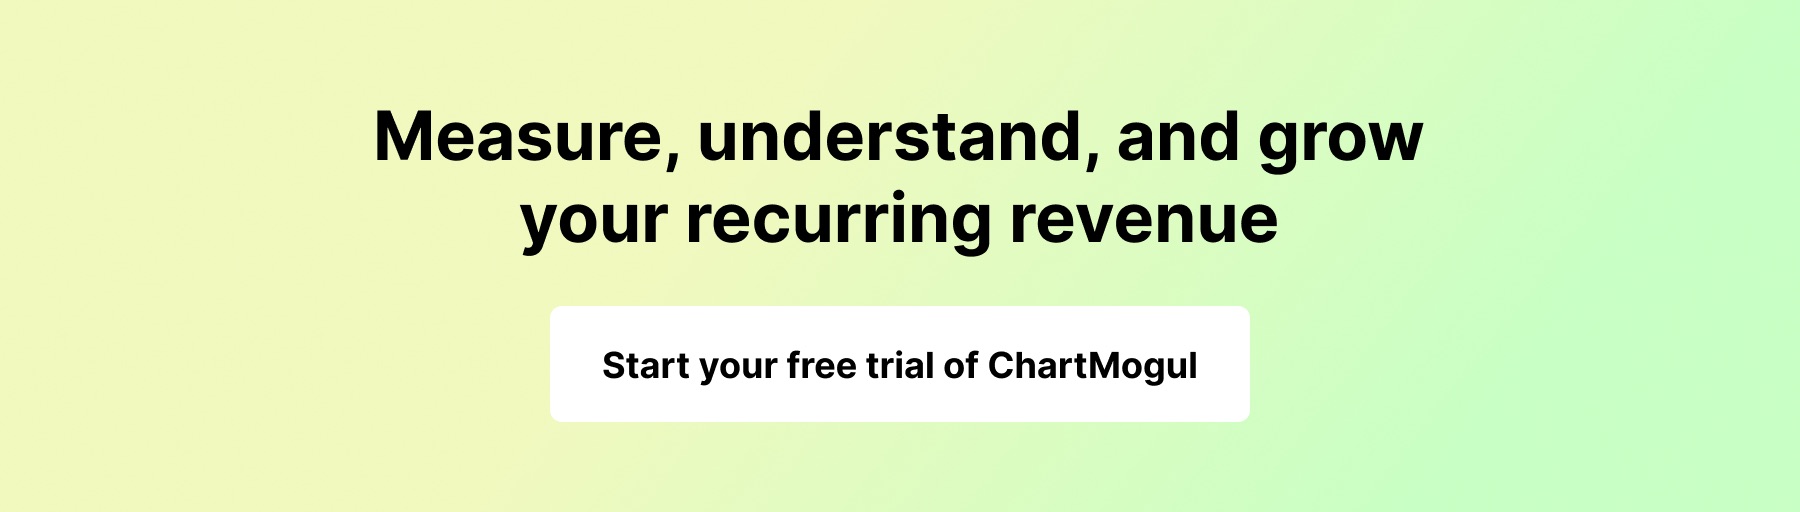 Measure Understand and Grow your recurring revenue with ChartMogul